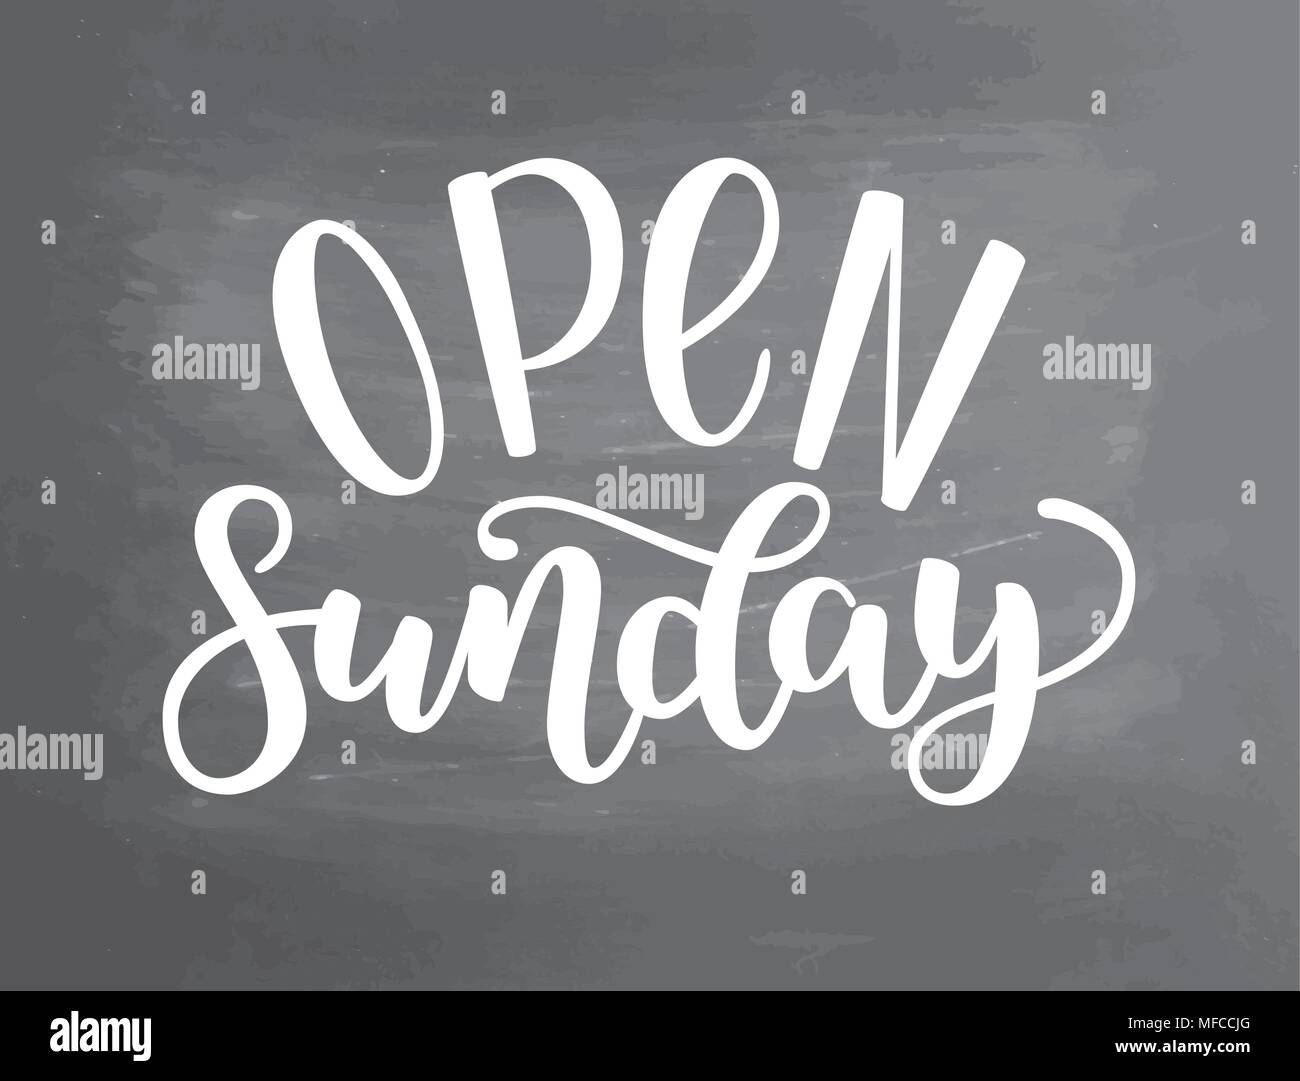 Open sunday handlettering isolated on textured chalkboard background, vector illustration. Brush ink lettering. Modern calligraphy for public places, shops and others Stock Vector